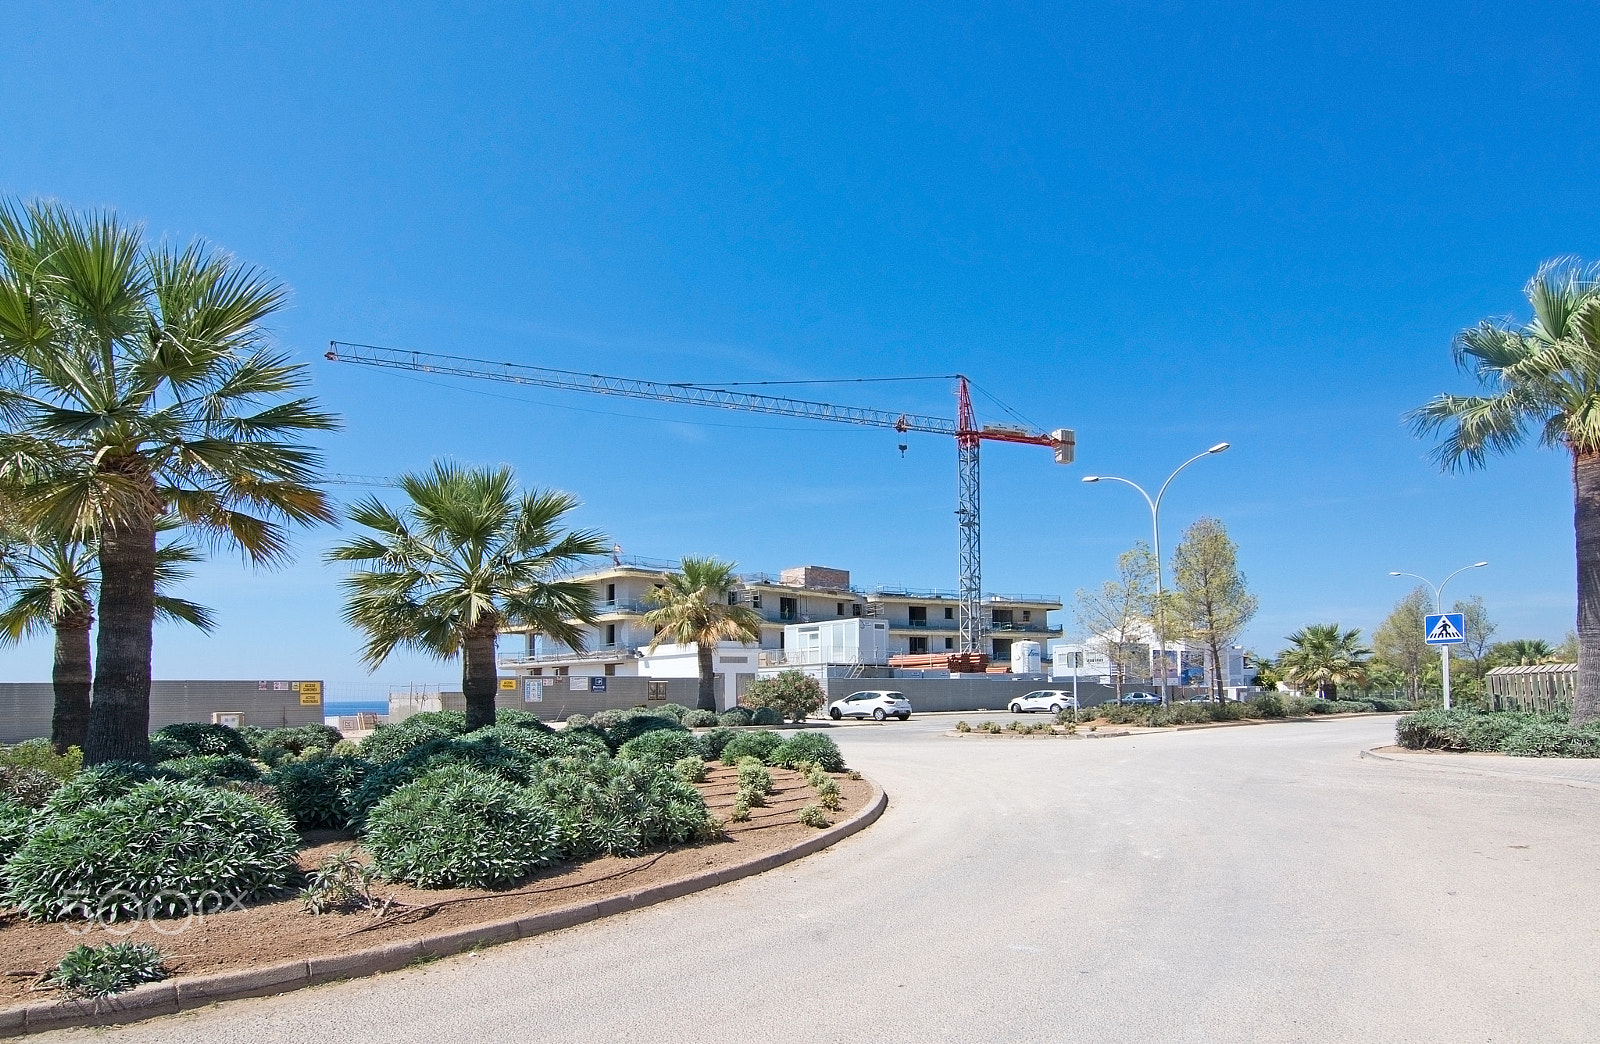 Nikon D7100 sample photo. Construction site with ocean view photography